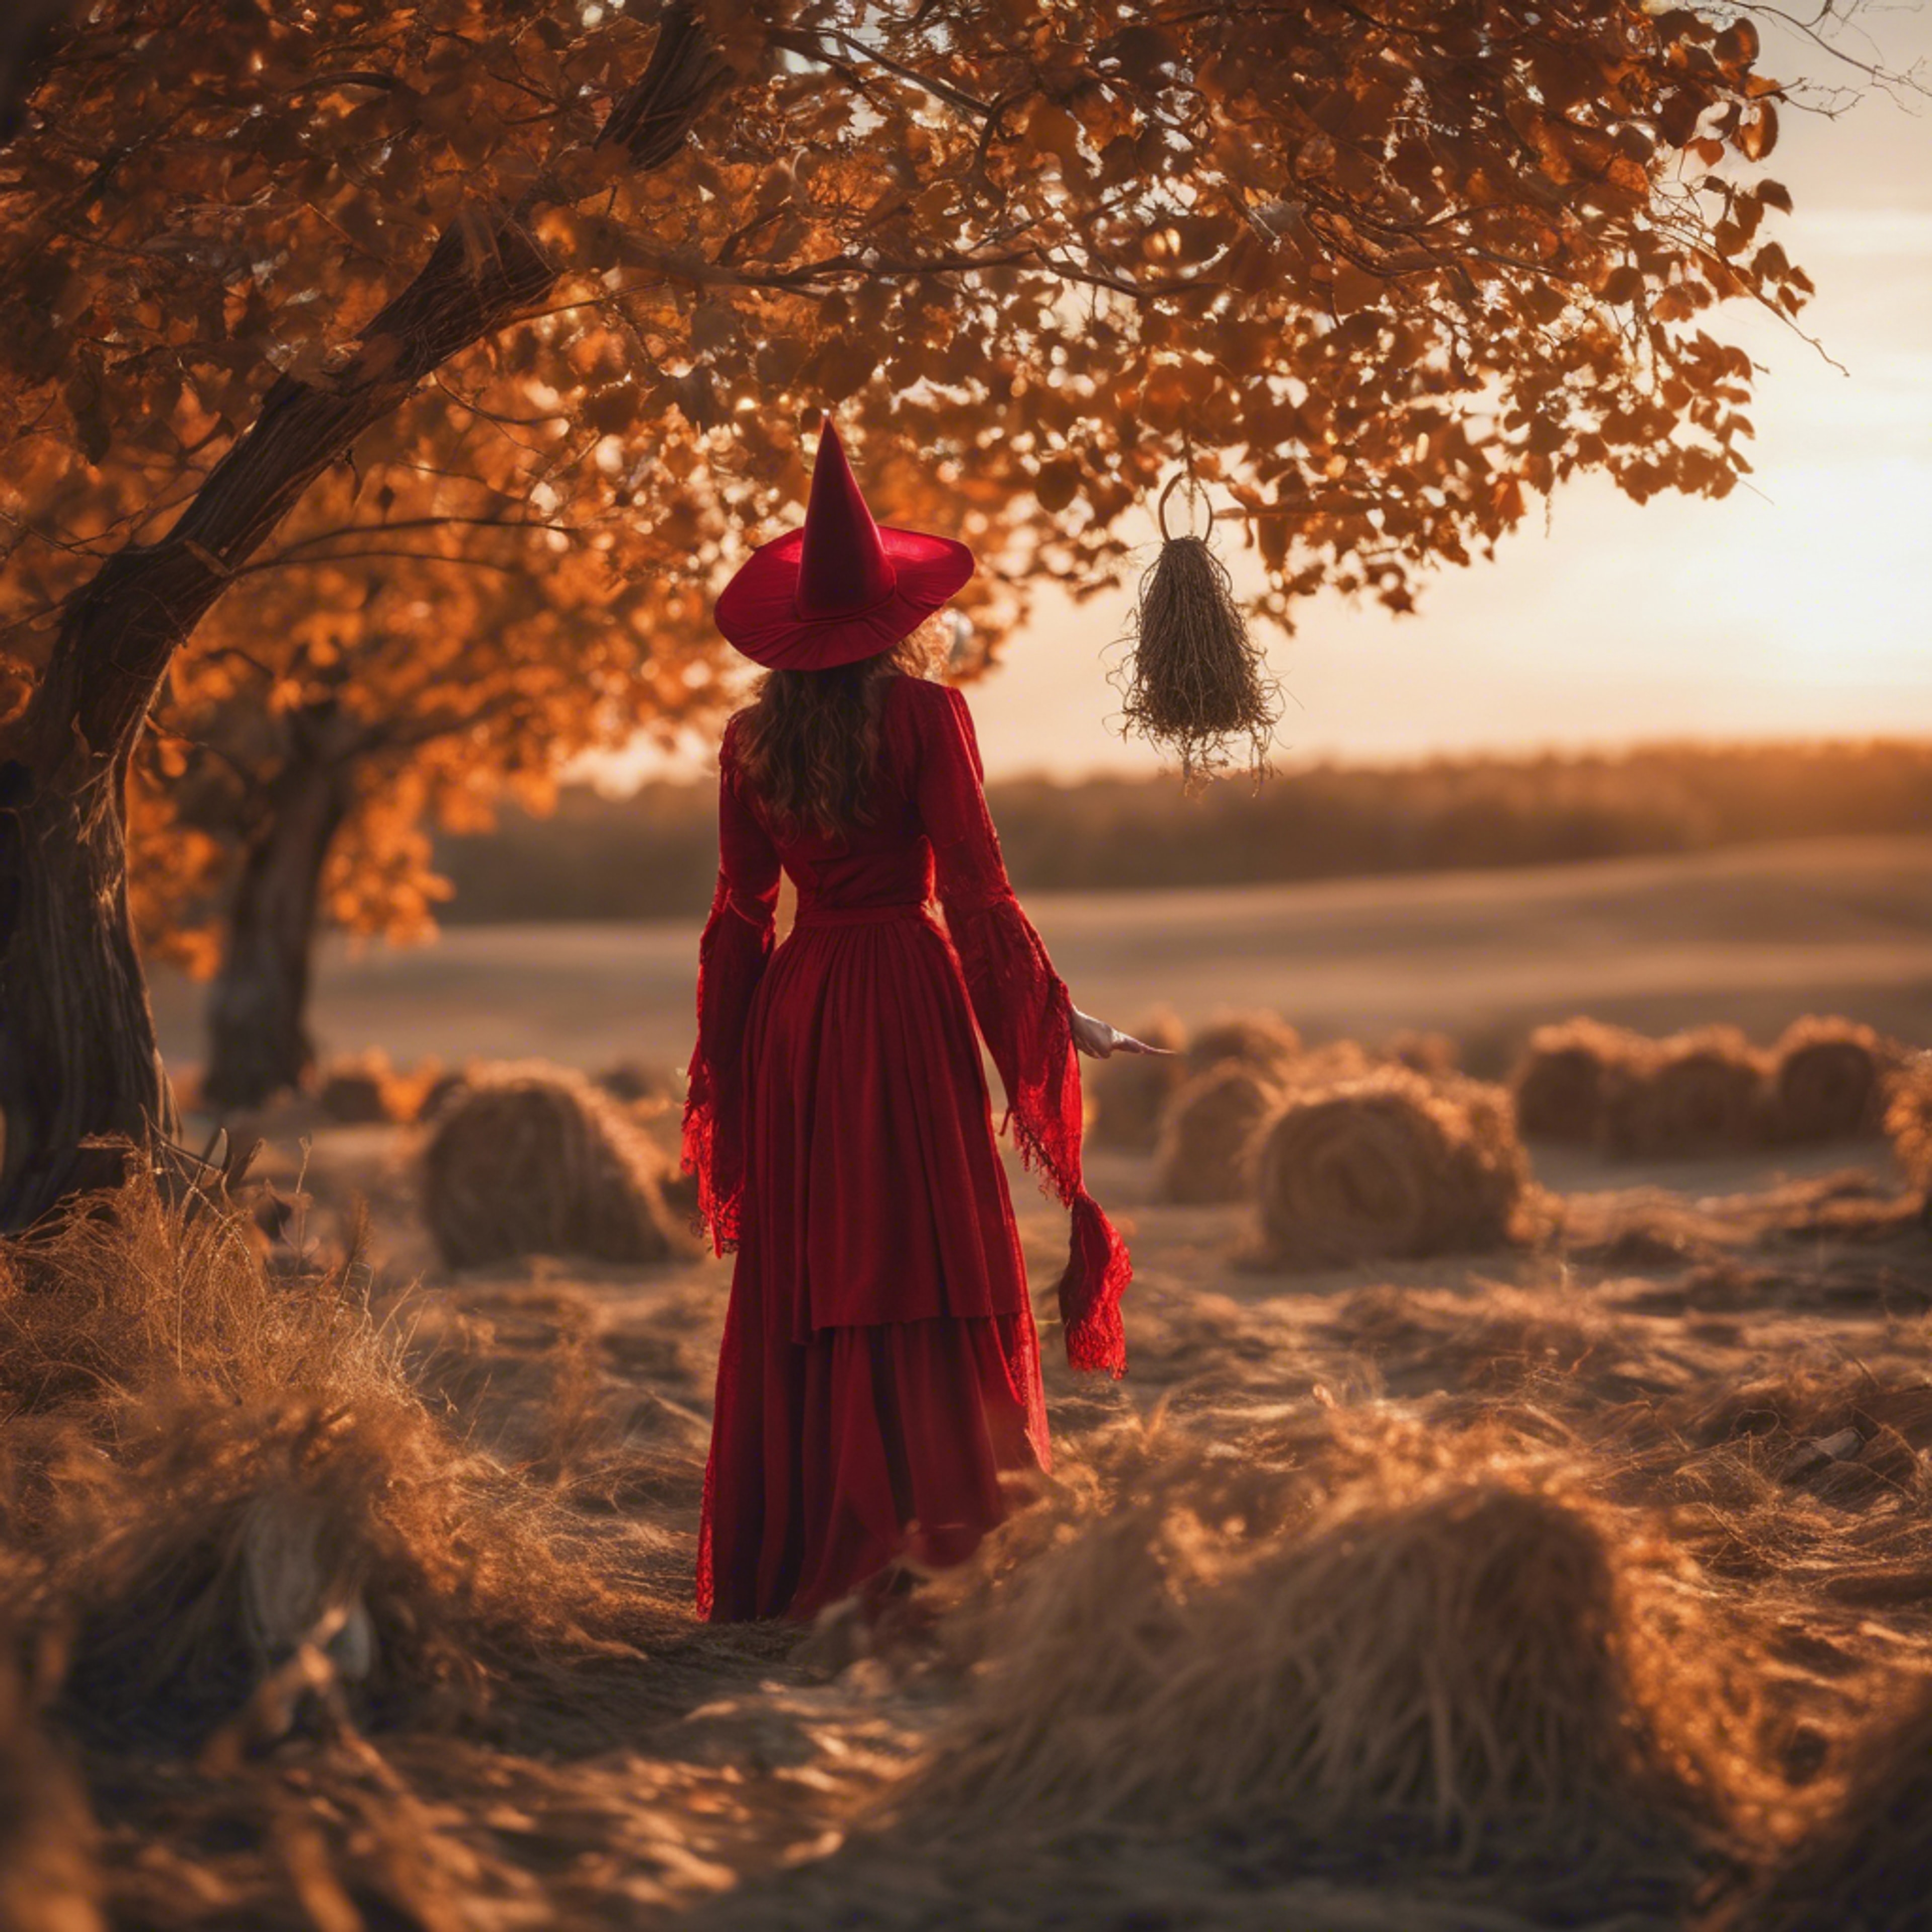 A lone witch in red garb practicing her Gothic rituals by the golden light of a harvest moon. Wallpaper[9a5f1b3ad6ac4ad6bd52]